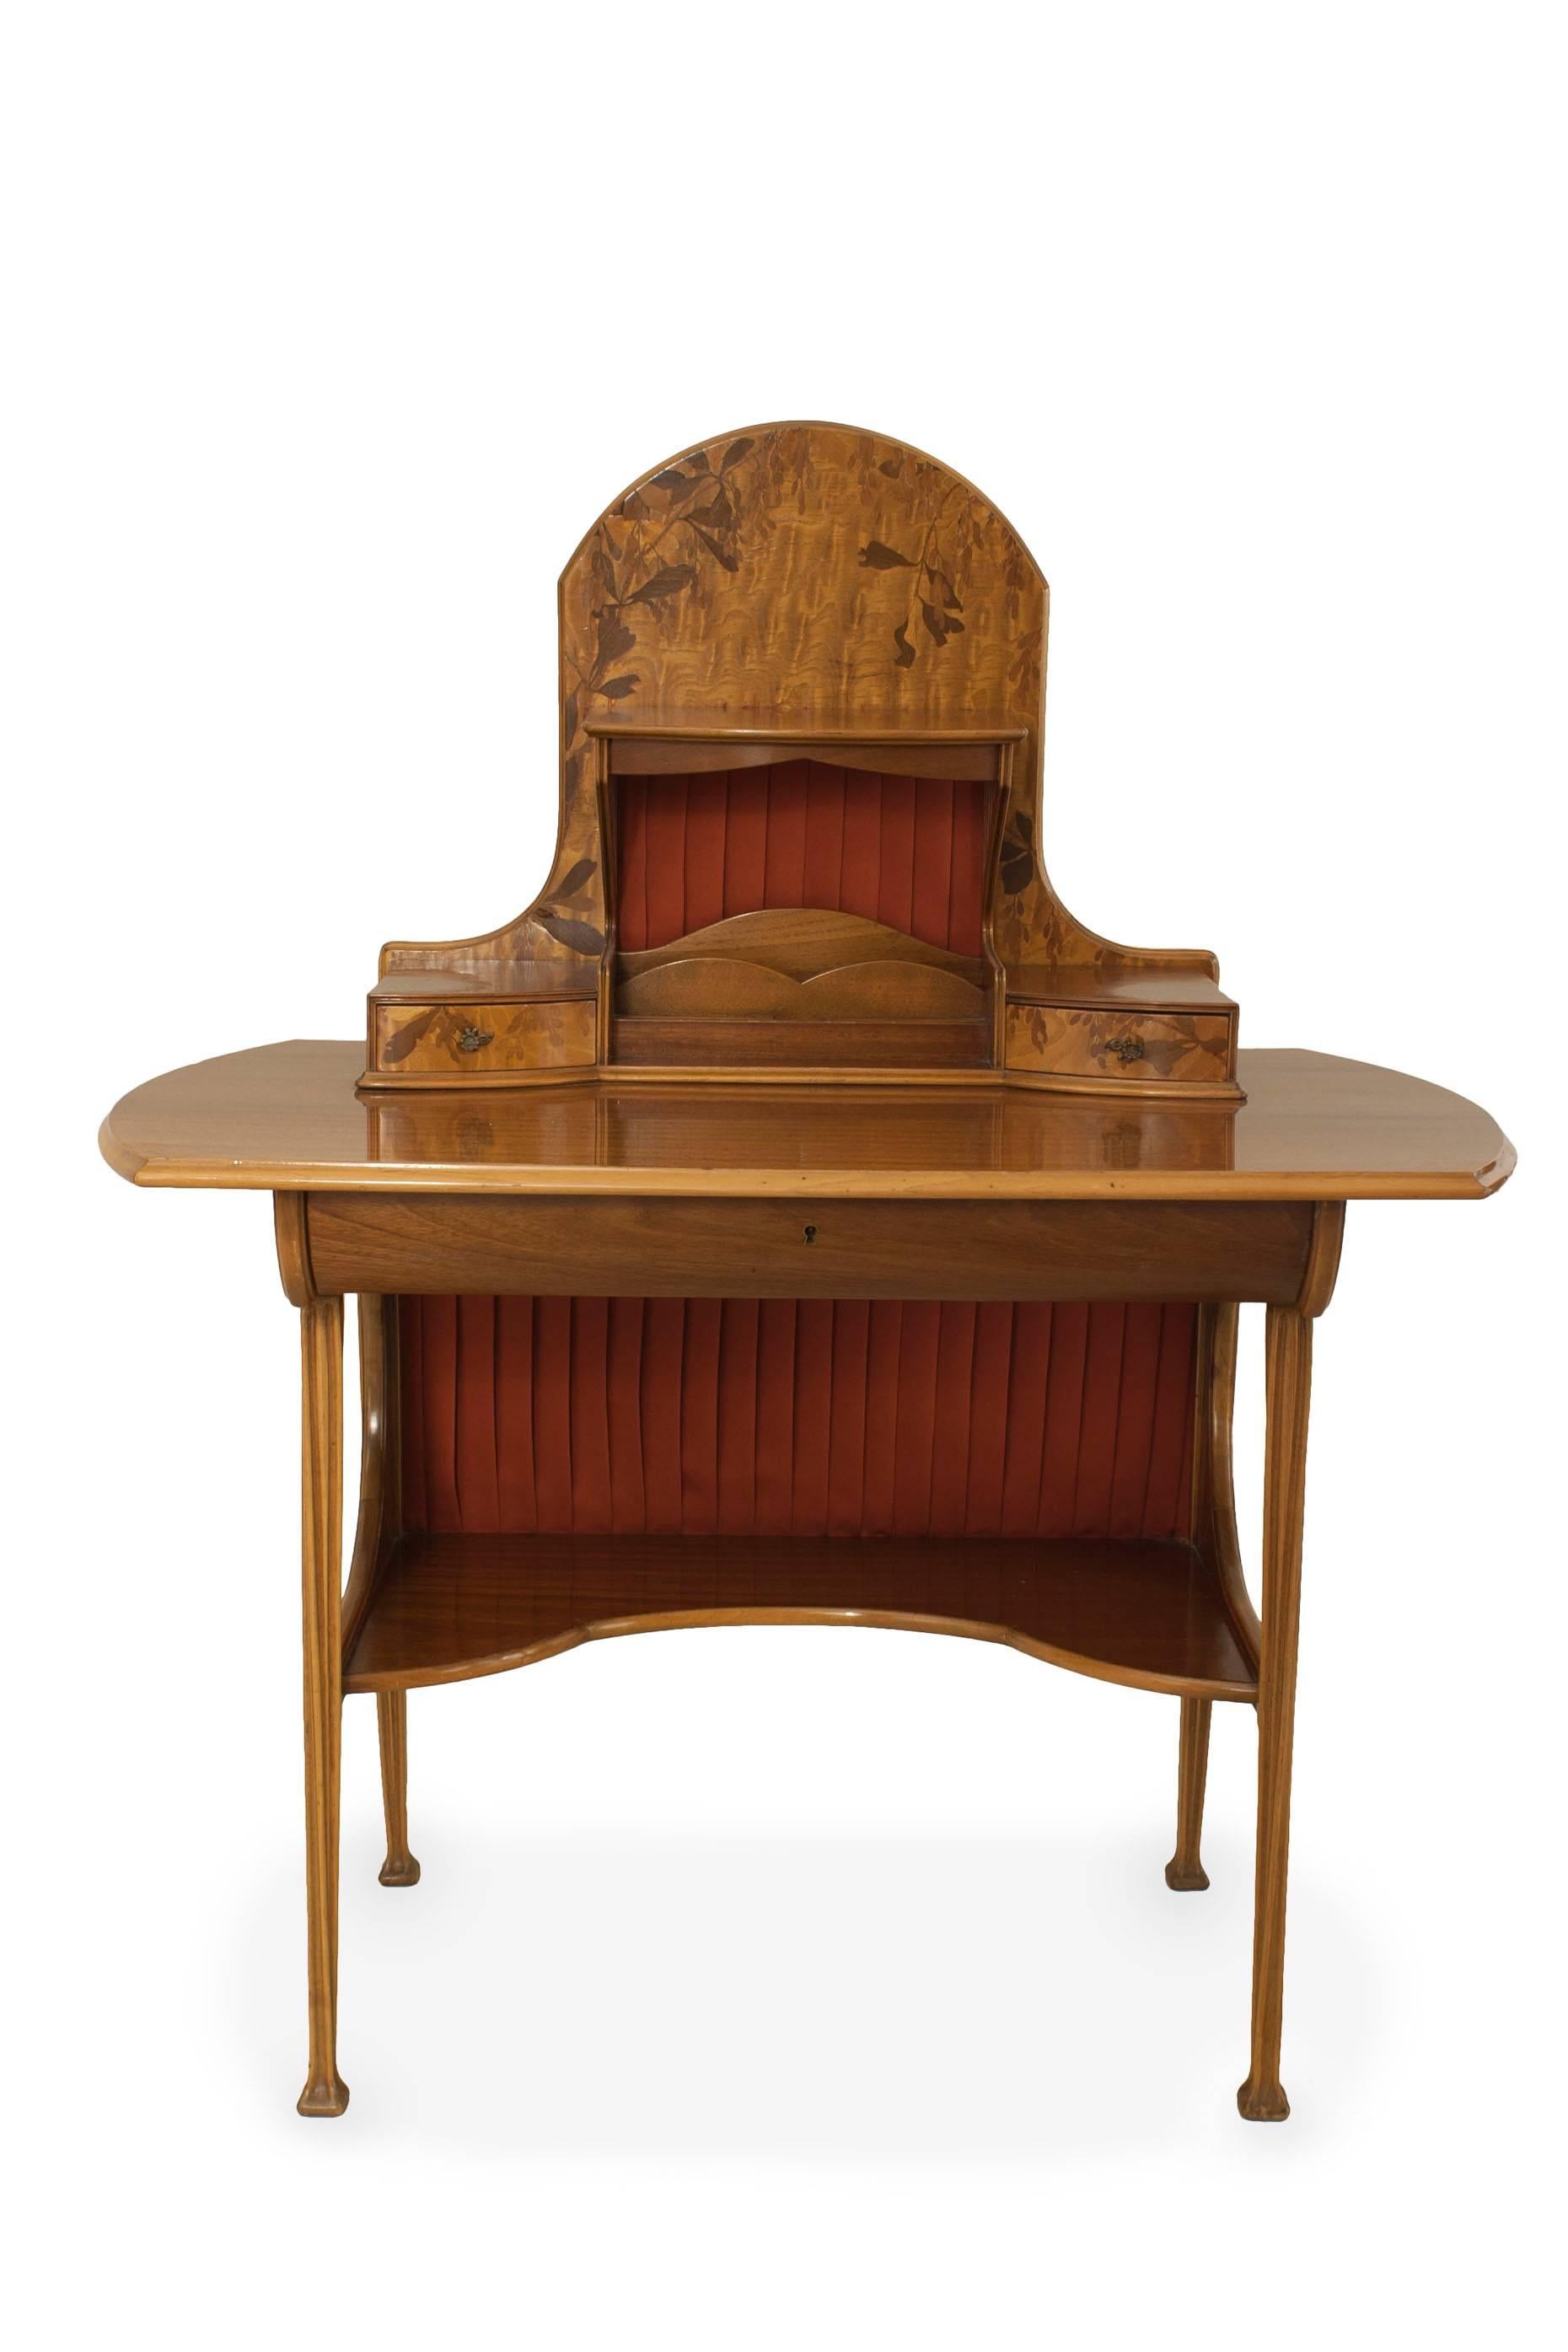 French Art Nouveau dressing table / writing desk with a floral inlaid arch top upper structure having a shelf & letter slats between 2 small drawers (Manner of MAJORELLE)
